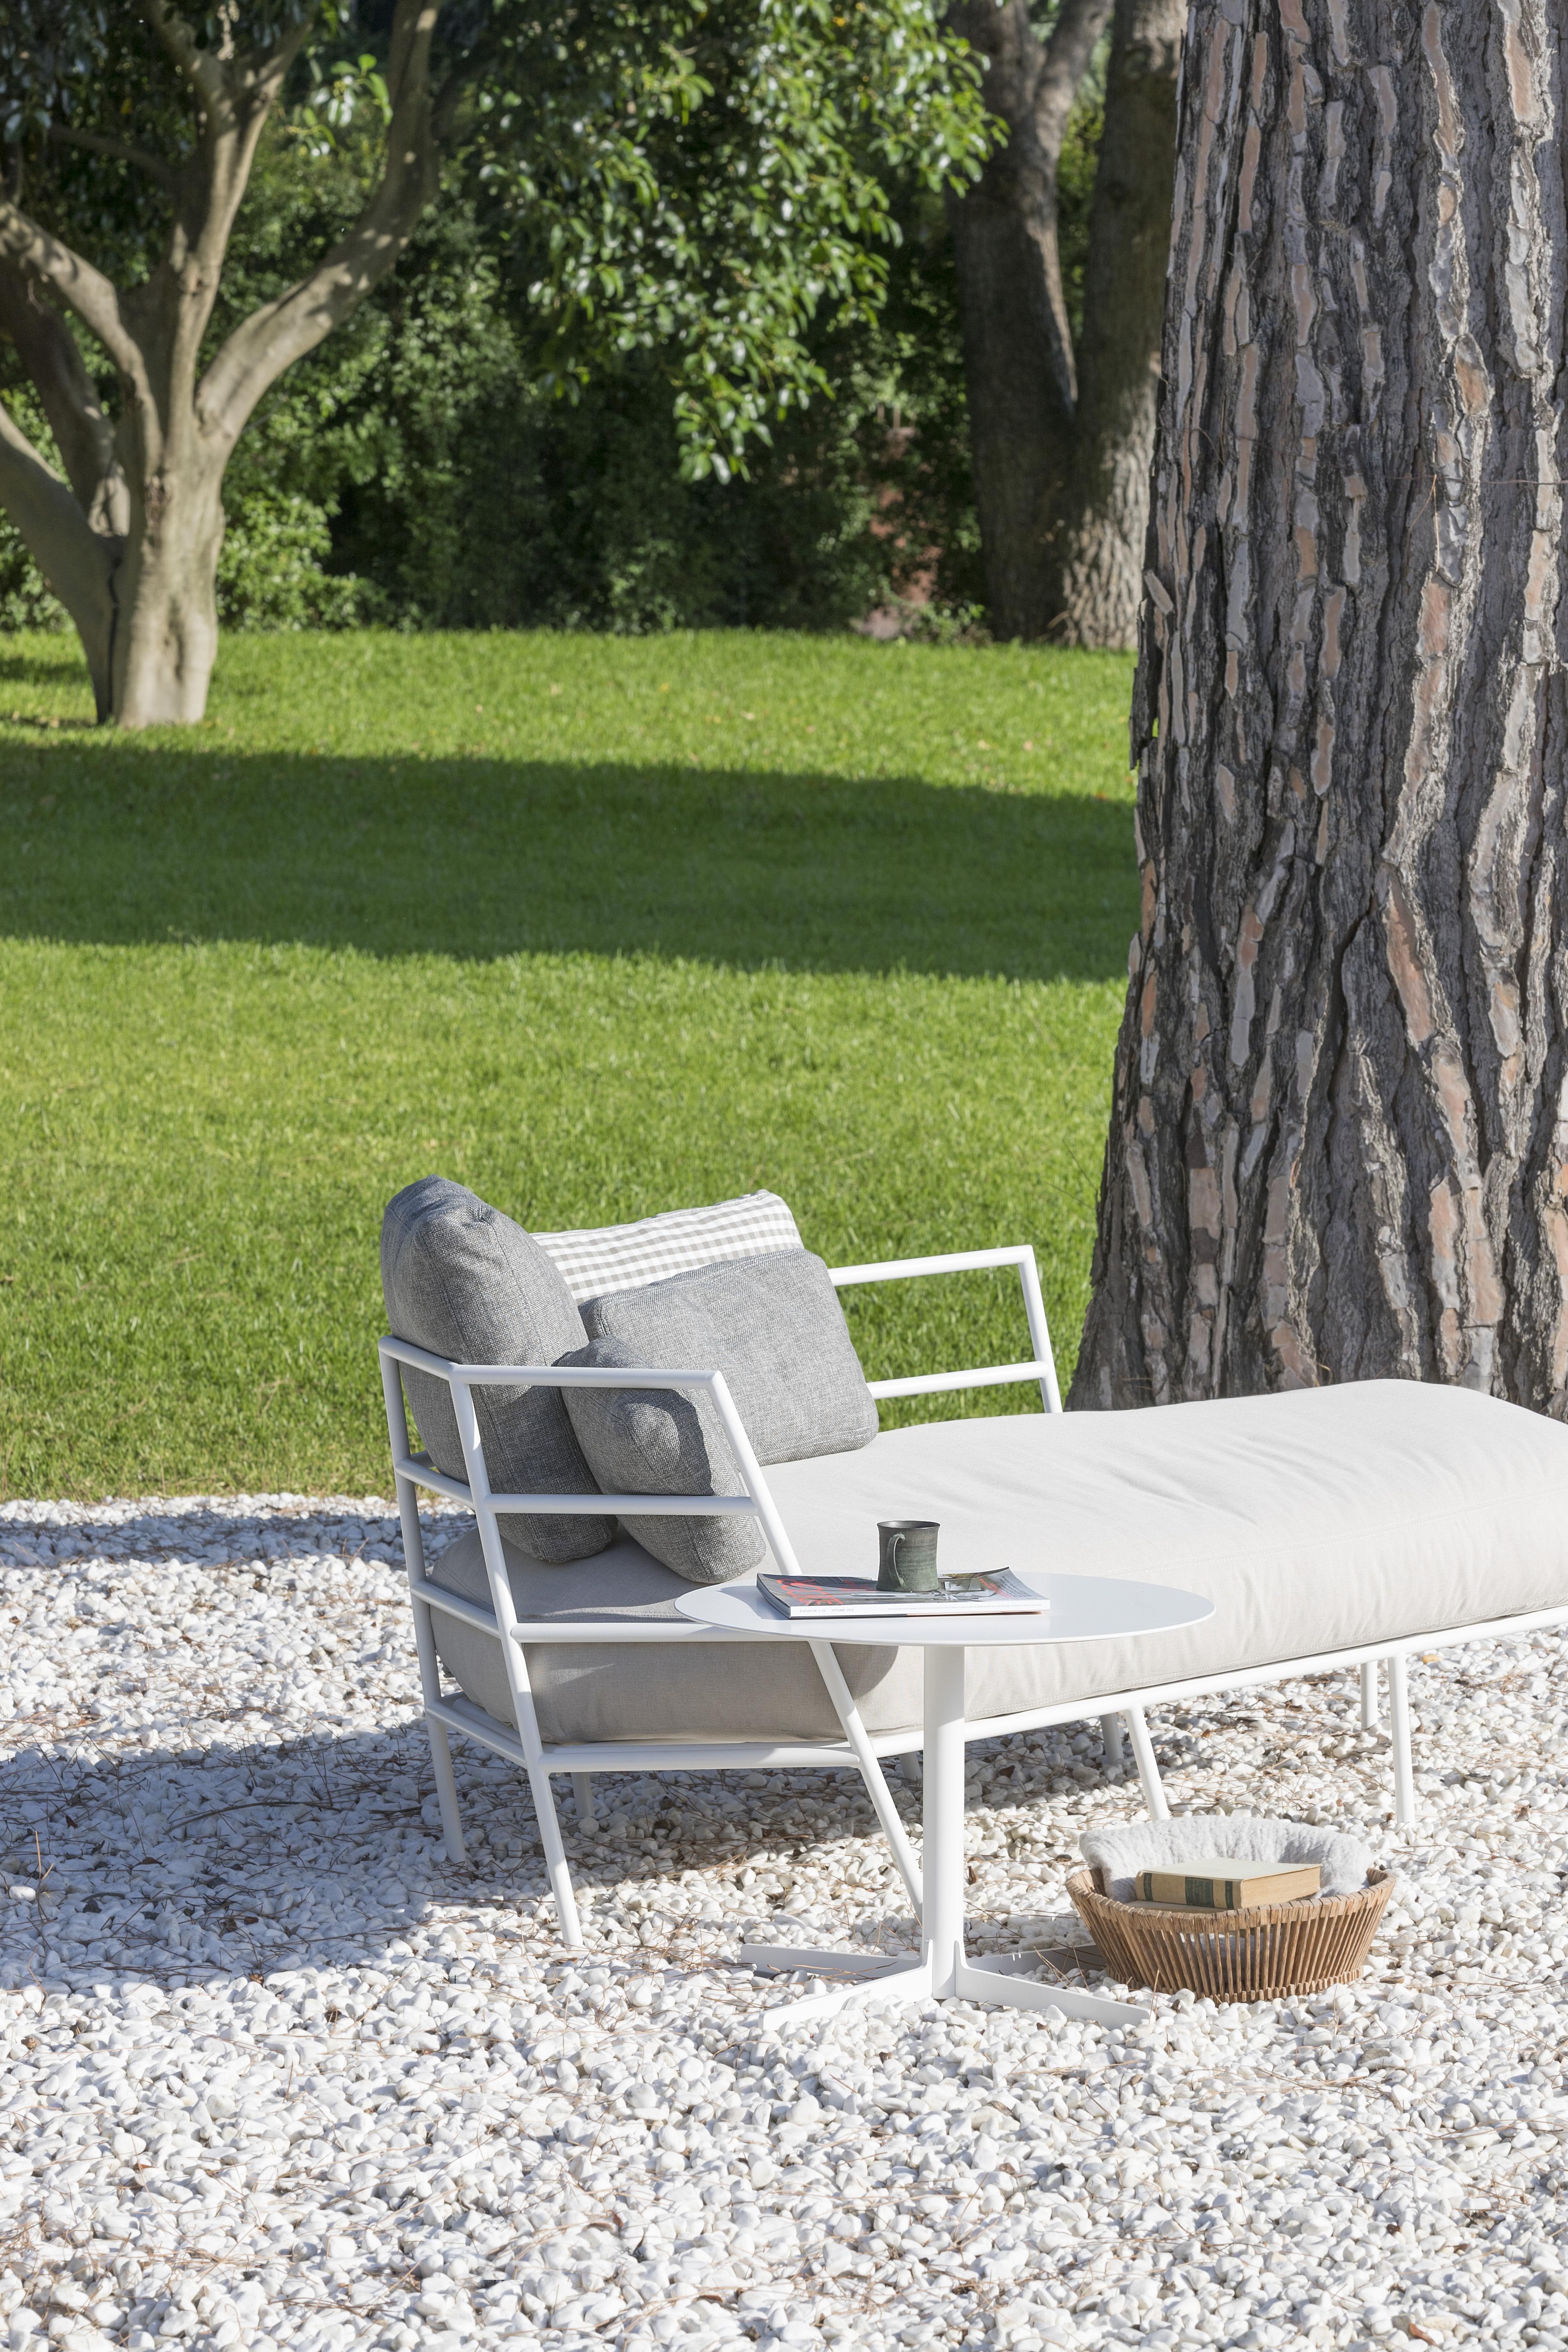 Alias 373_O Dehors Dormeuse in Light Grey Upholstery with Black Lacquered Frame by Michele De Lucch

Dormeuse for outdoor use with structure in lacquered steel. Removable cover in Tempotest® or Alias® fabric. Cushions included in the prices: pc.1